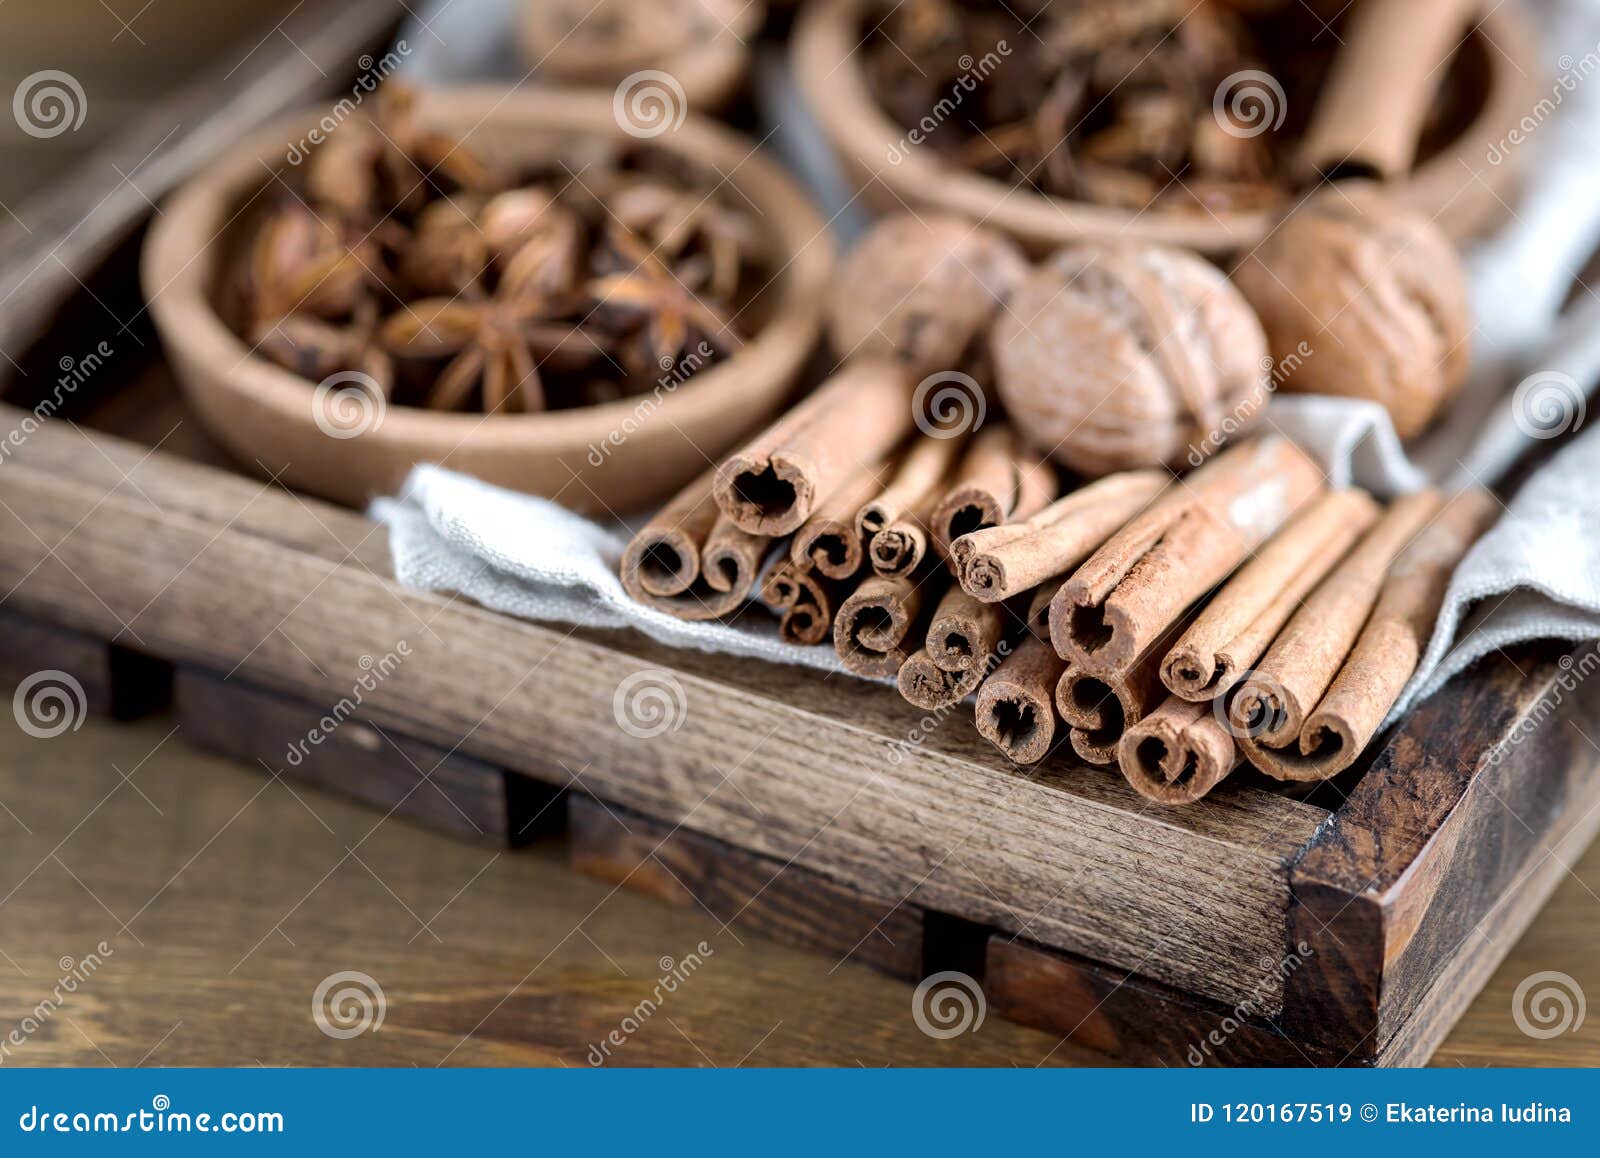 variety of spices anise stars cinnamone sticks nuts christmas ingredients for cake close up